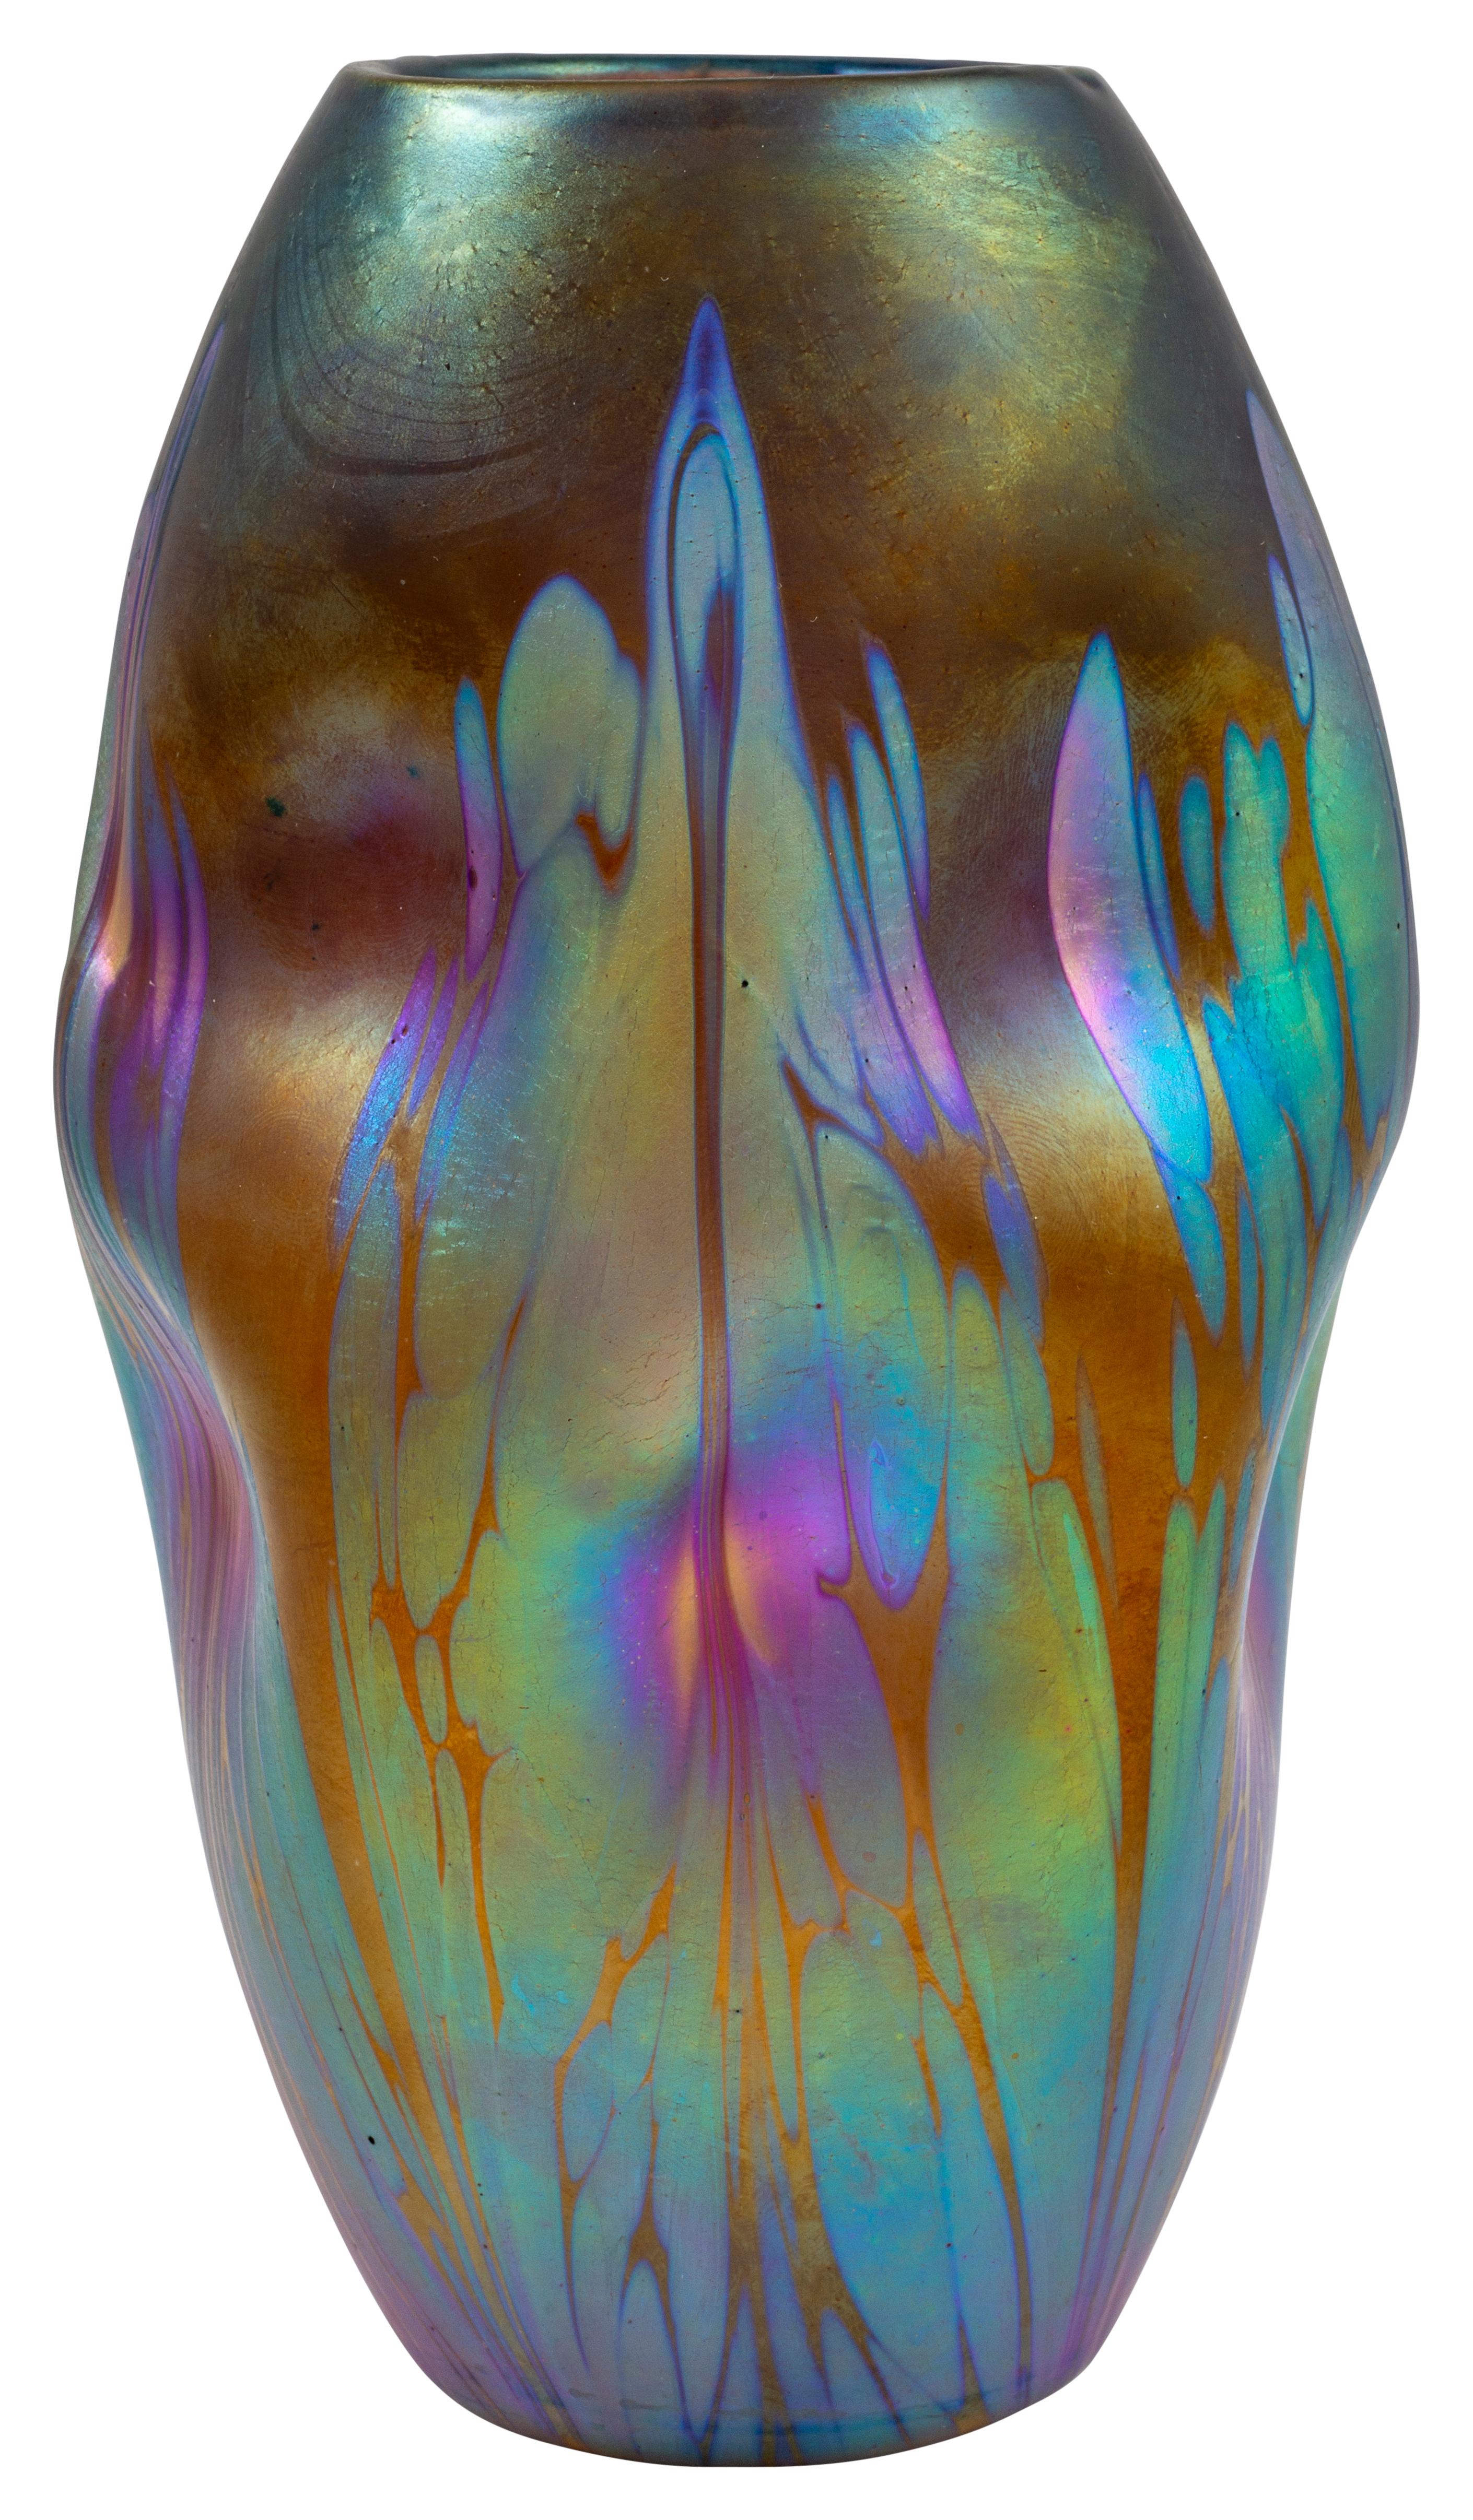 Austrian Jugendstil Glass Vase Blue Purple Johann Loetz Witwe with Medici Maron PG 2/484 decoration ca. 1901

In 1900, the company Johann Loetz-Witwe Klostermühle made its international breakthrough at the world exhibition in Paris with its richly